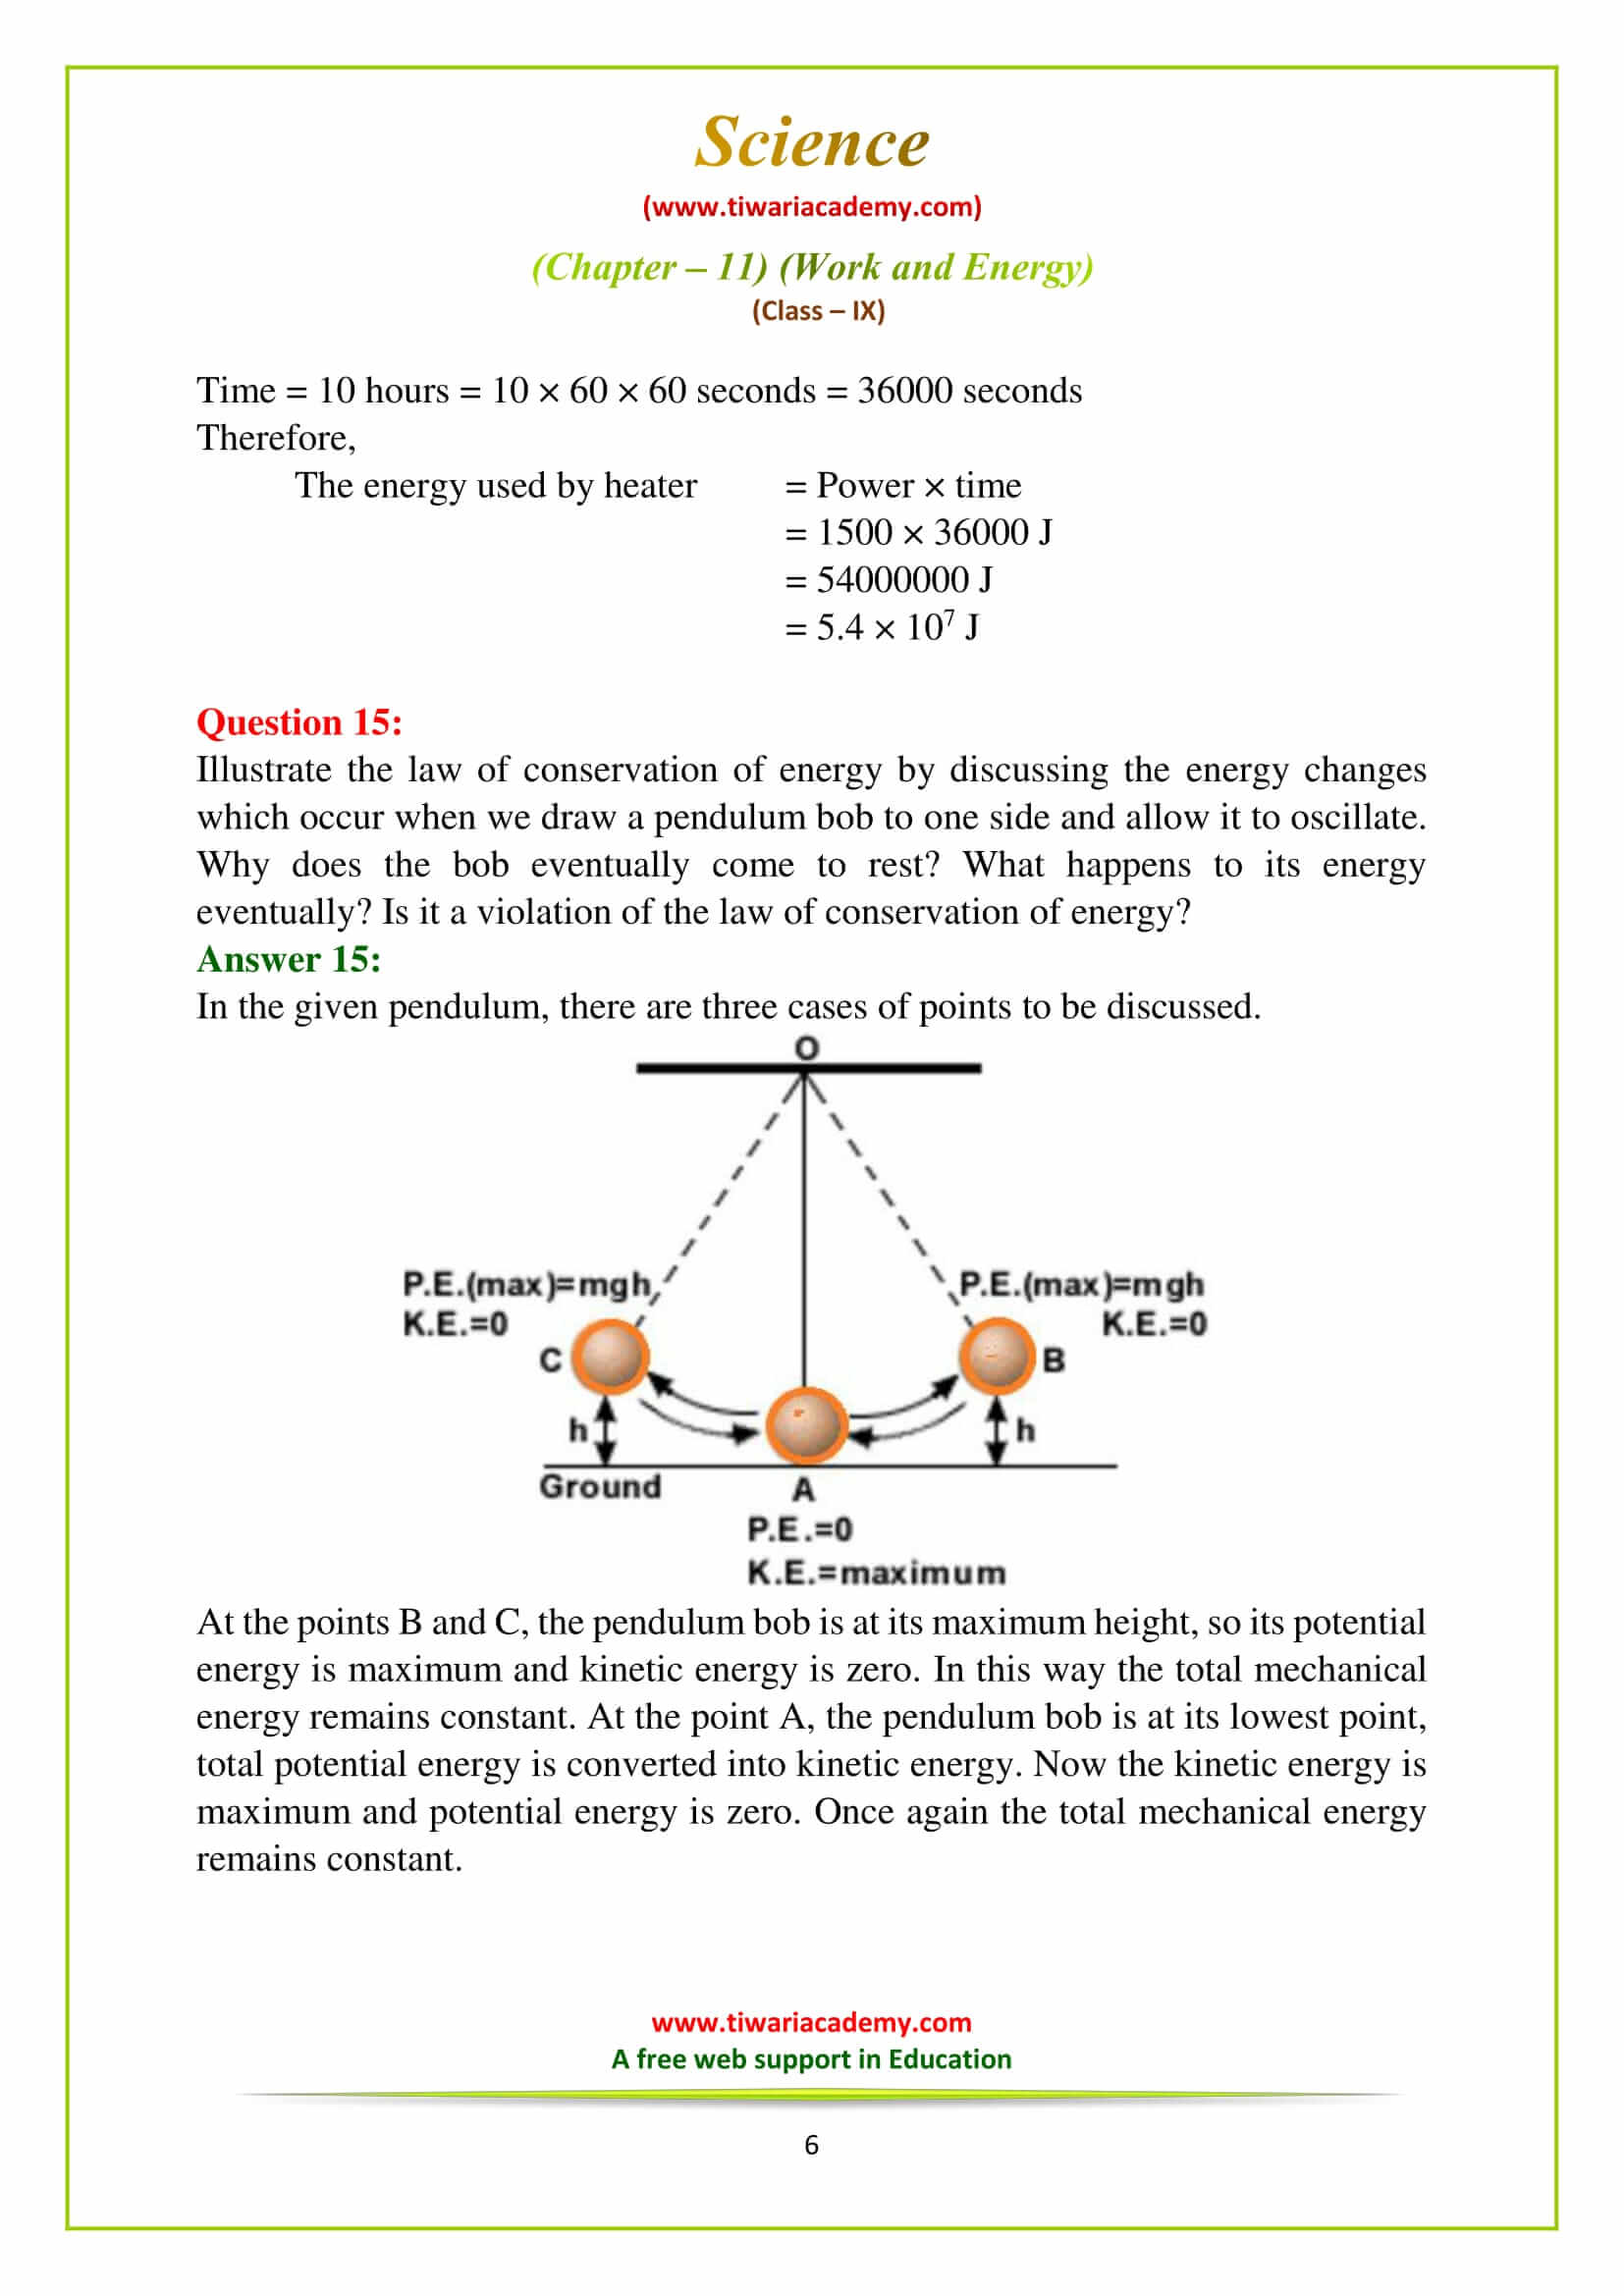 NCERT Solutions for Class 9 Science Chapter 11 Work and Energy Exercises for up bpard hgh school